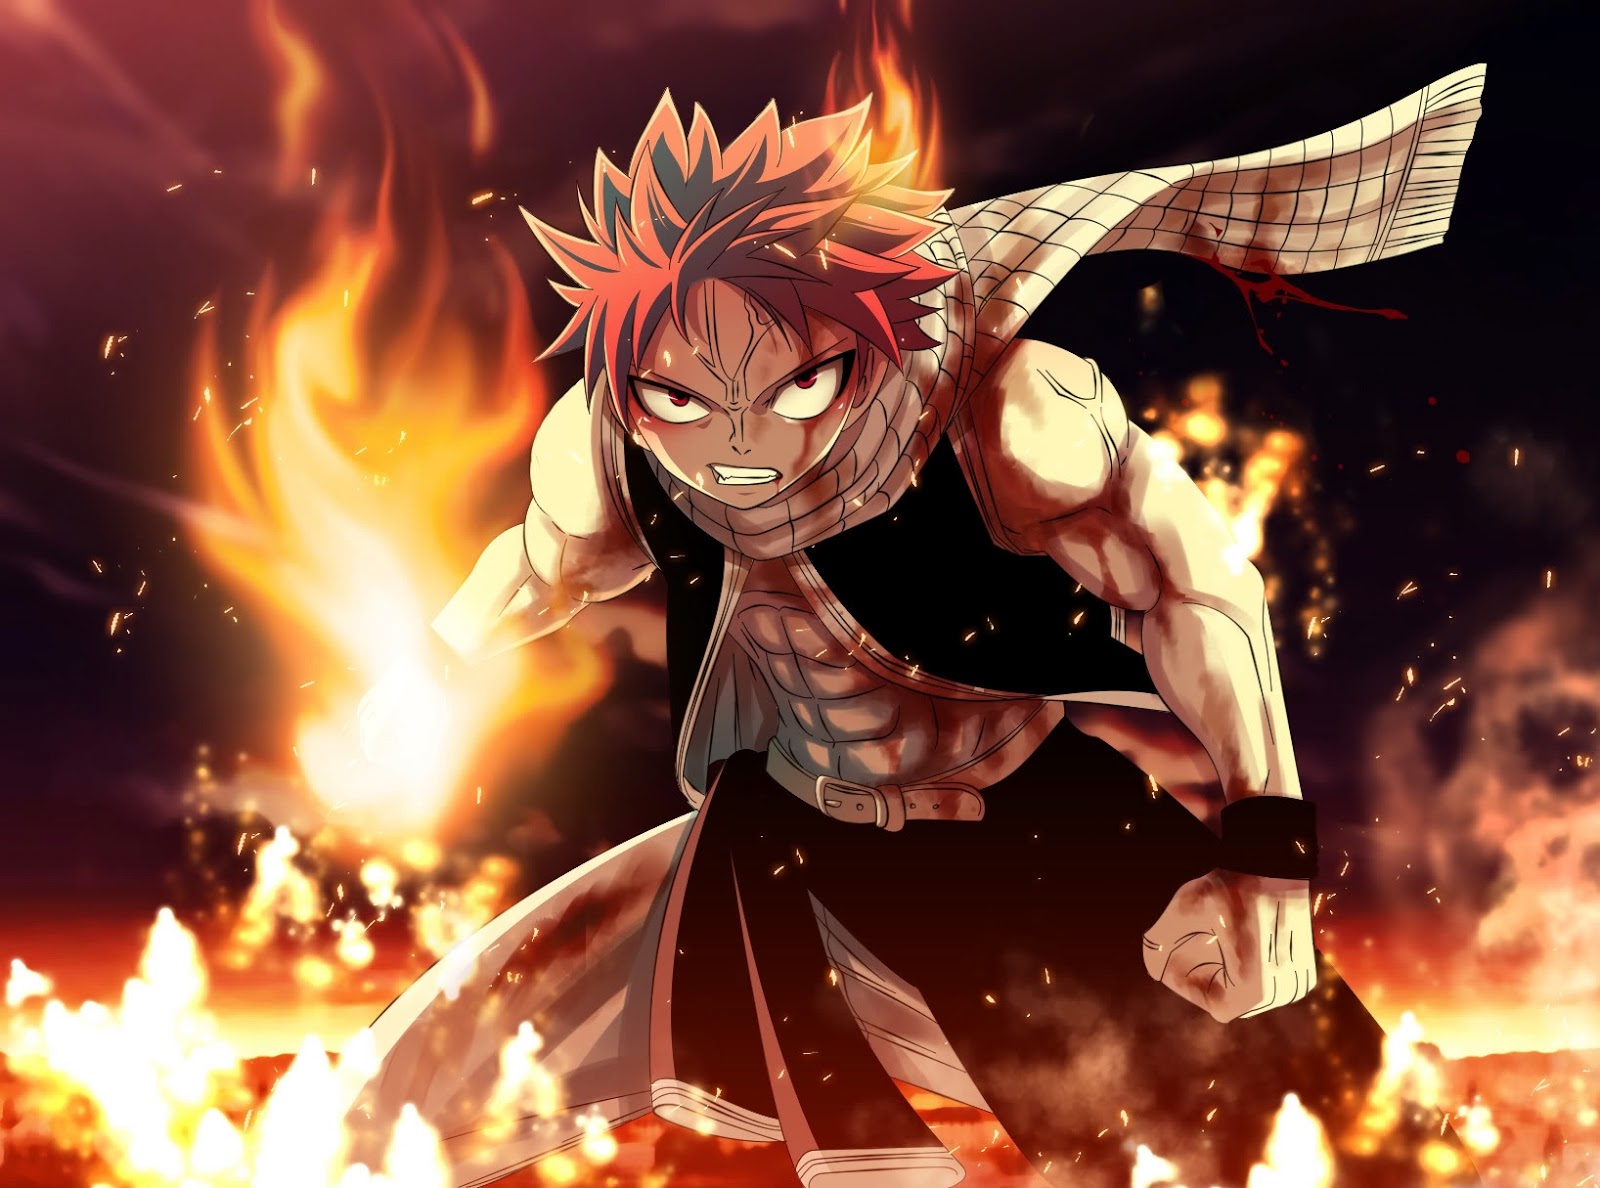 Can Natsu use the power of the other Dragon Slayers? - Quora